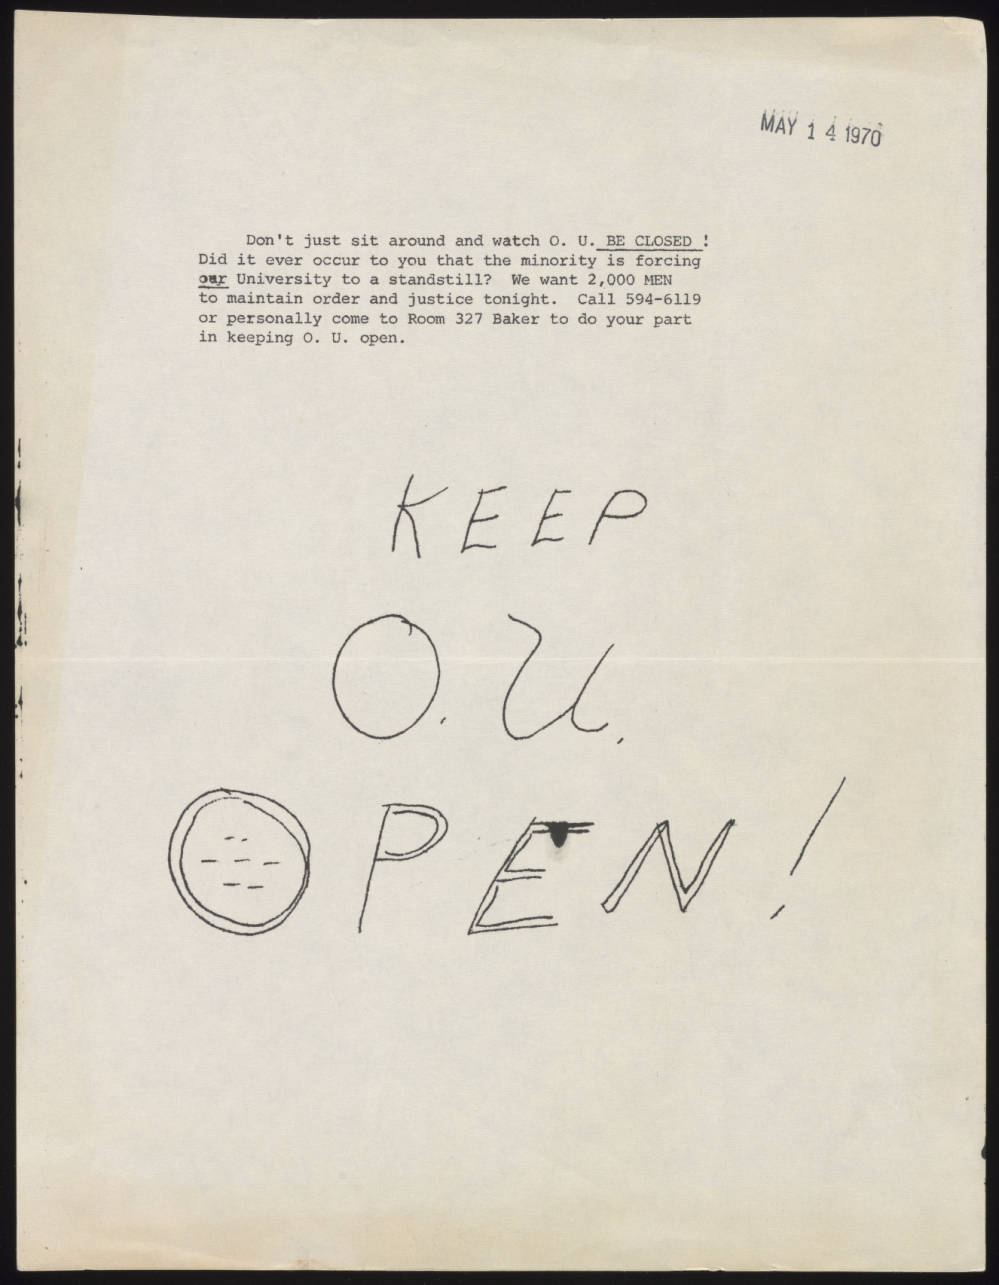 Flyer distributed on Ohio University campus, May 14, 1970, encouraging students to attend a meeting with the goal of preventing school closure